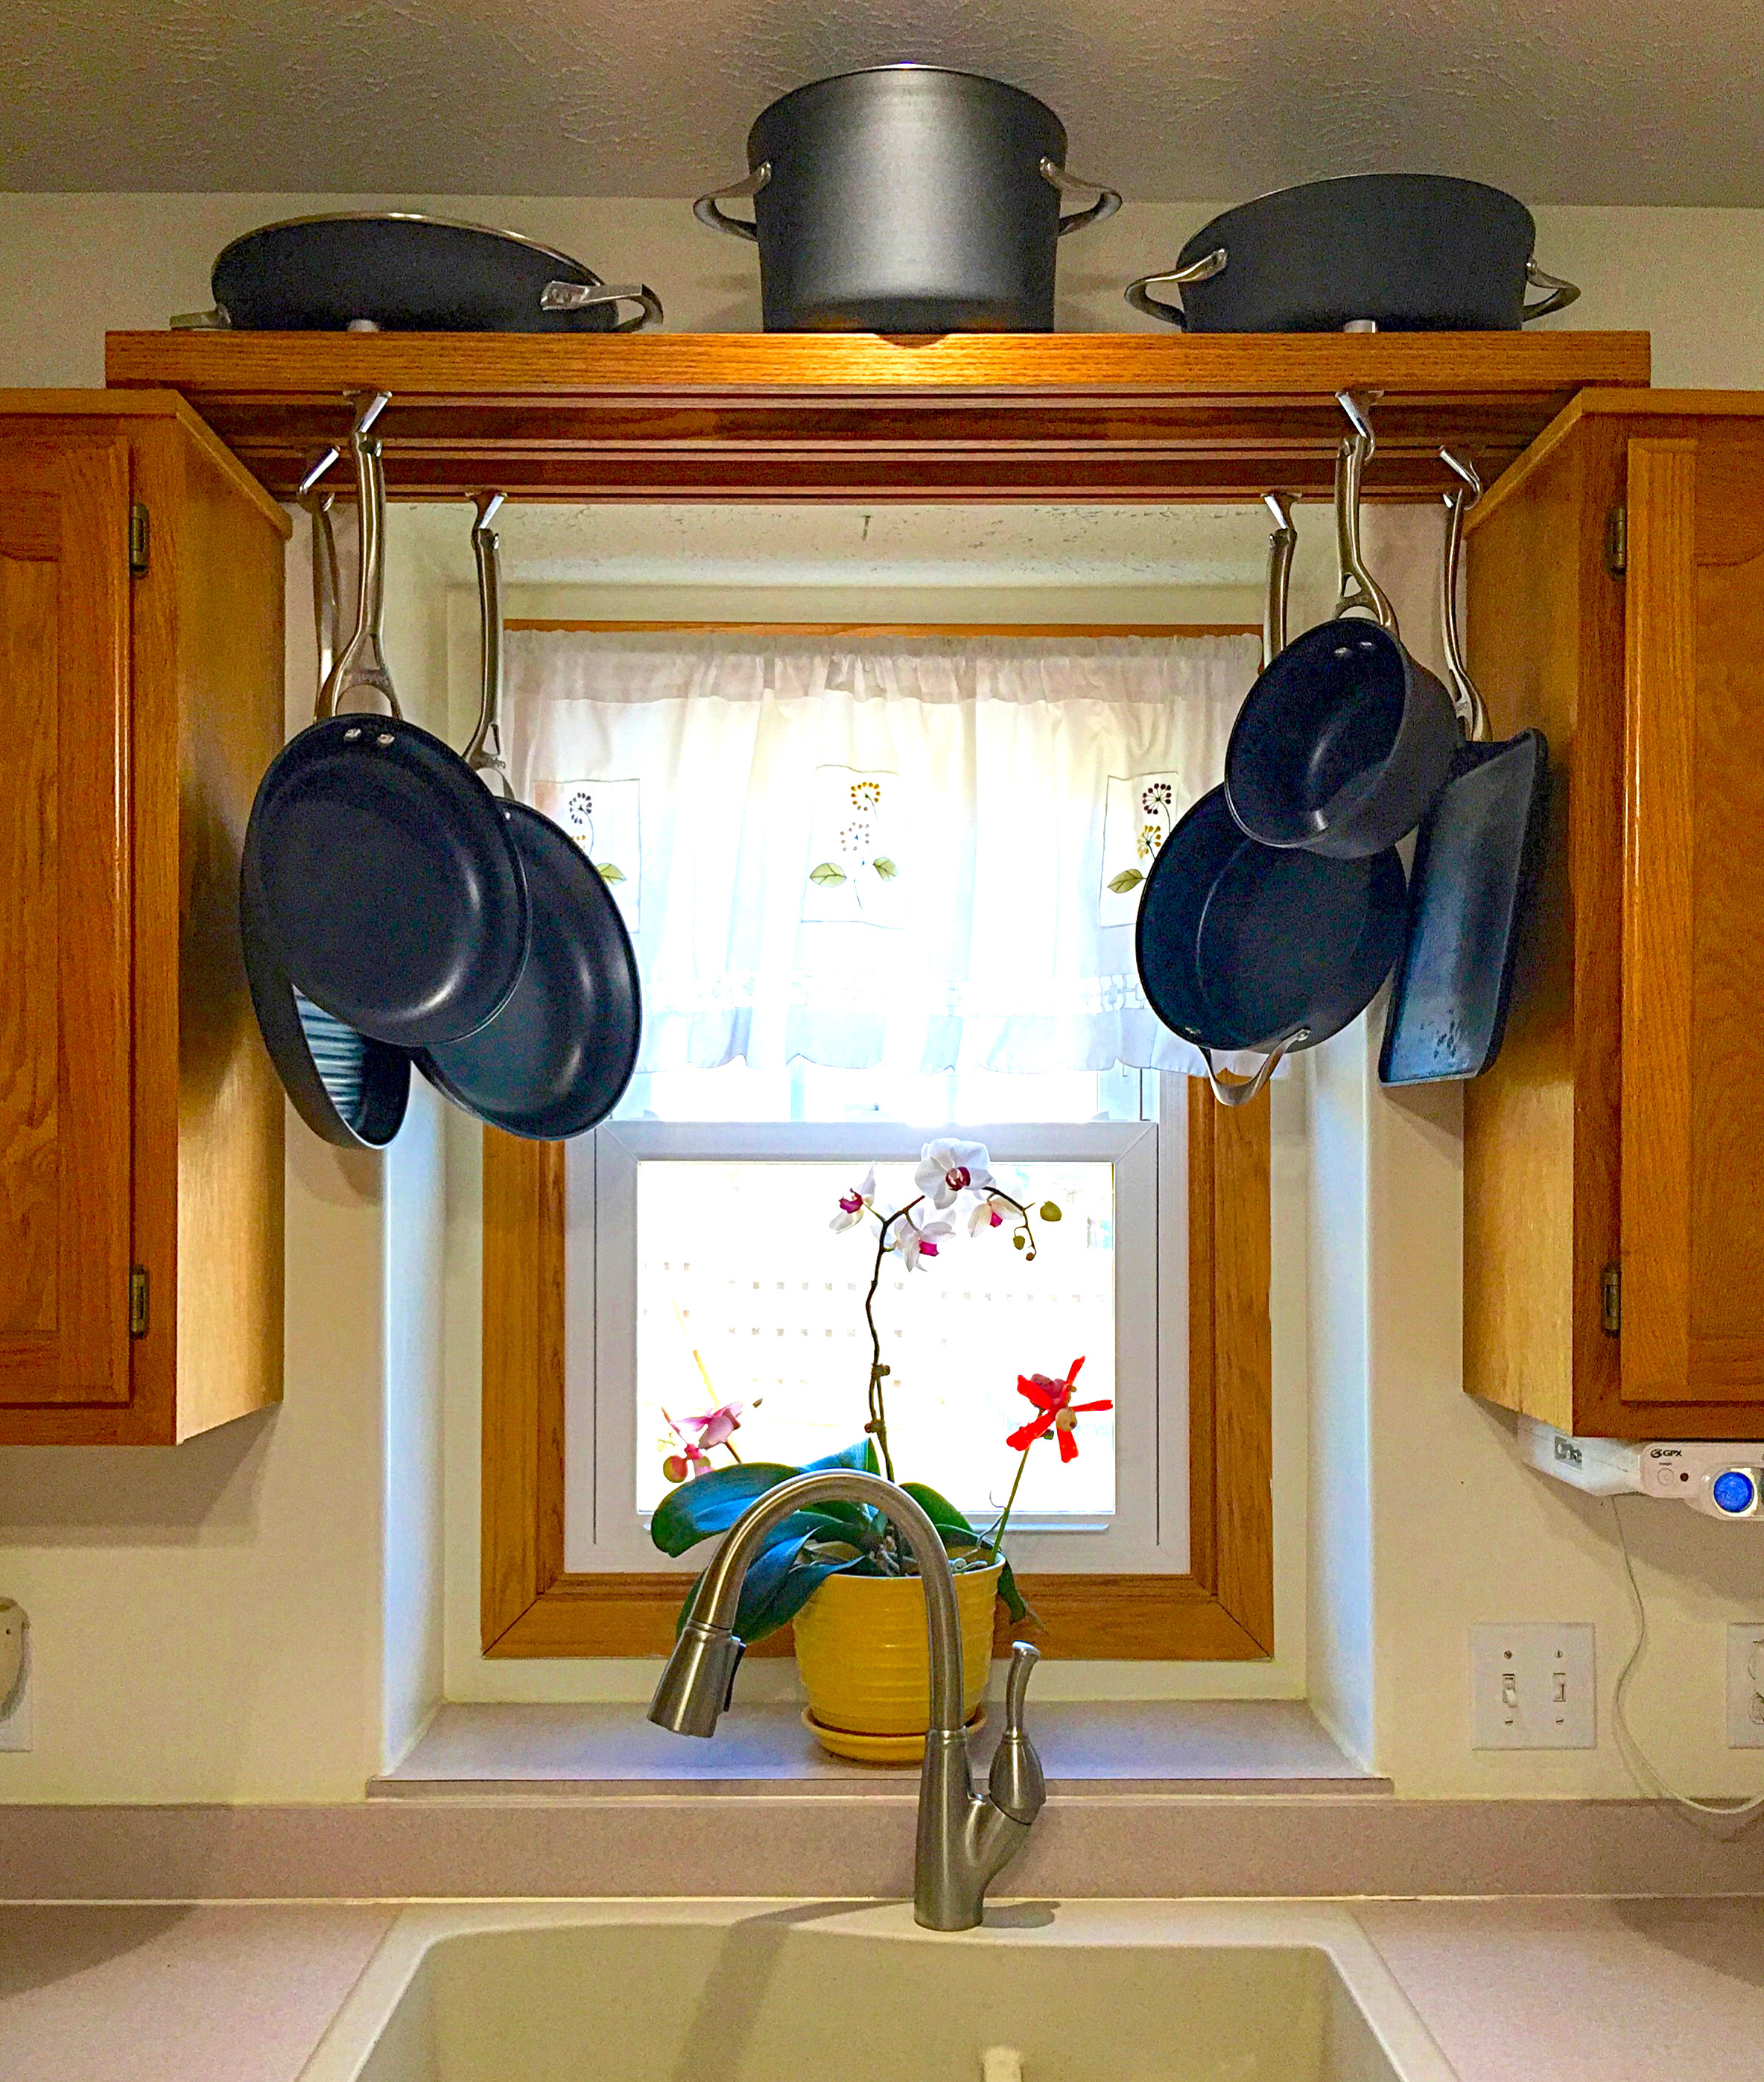 DIY Pot And Pan Rack
 Make use of space over the kitchen sink with this DIY pot